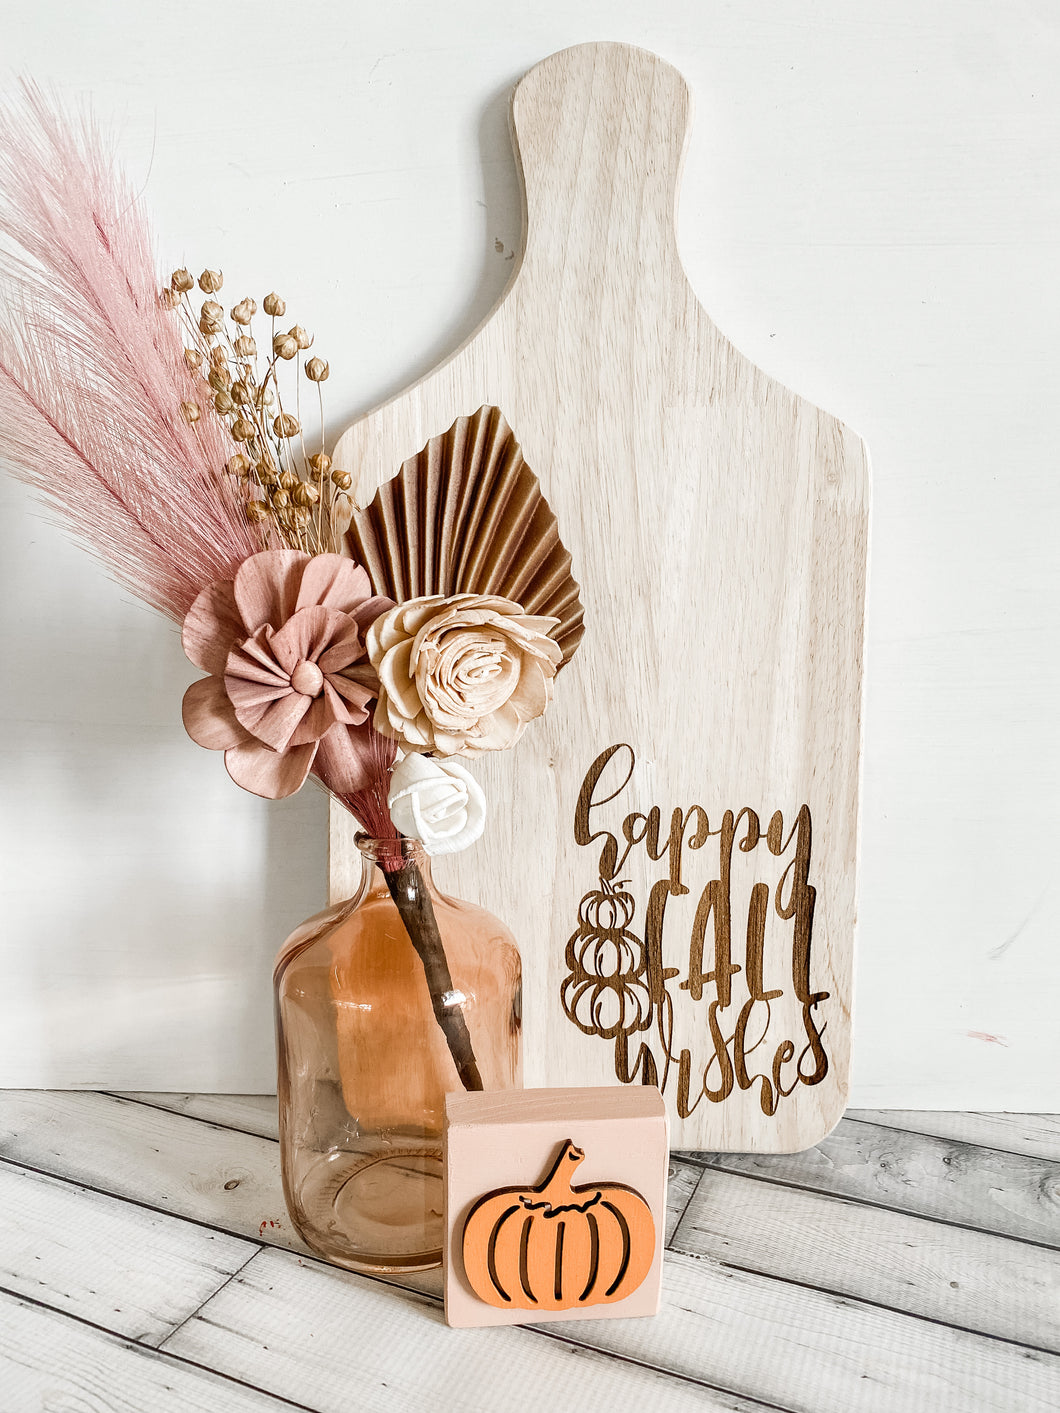 Happy Fall Wishes Engraved Decorative Board